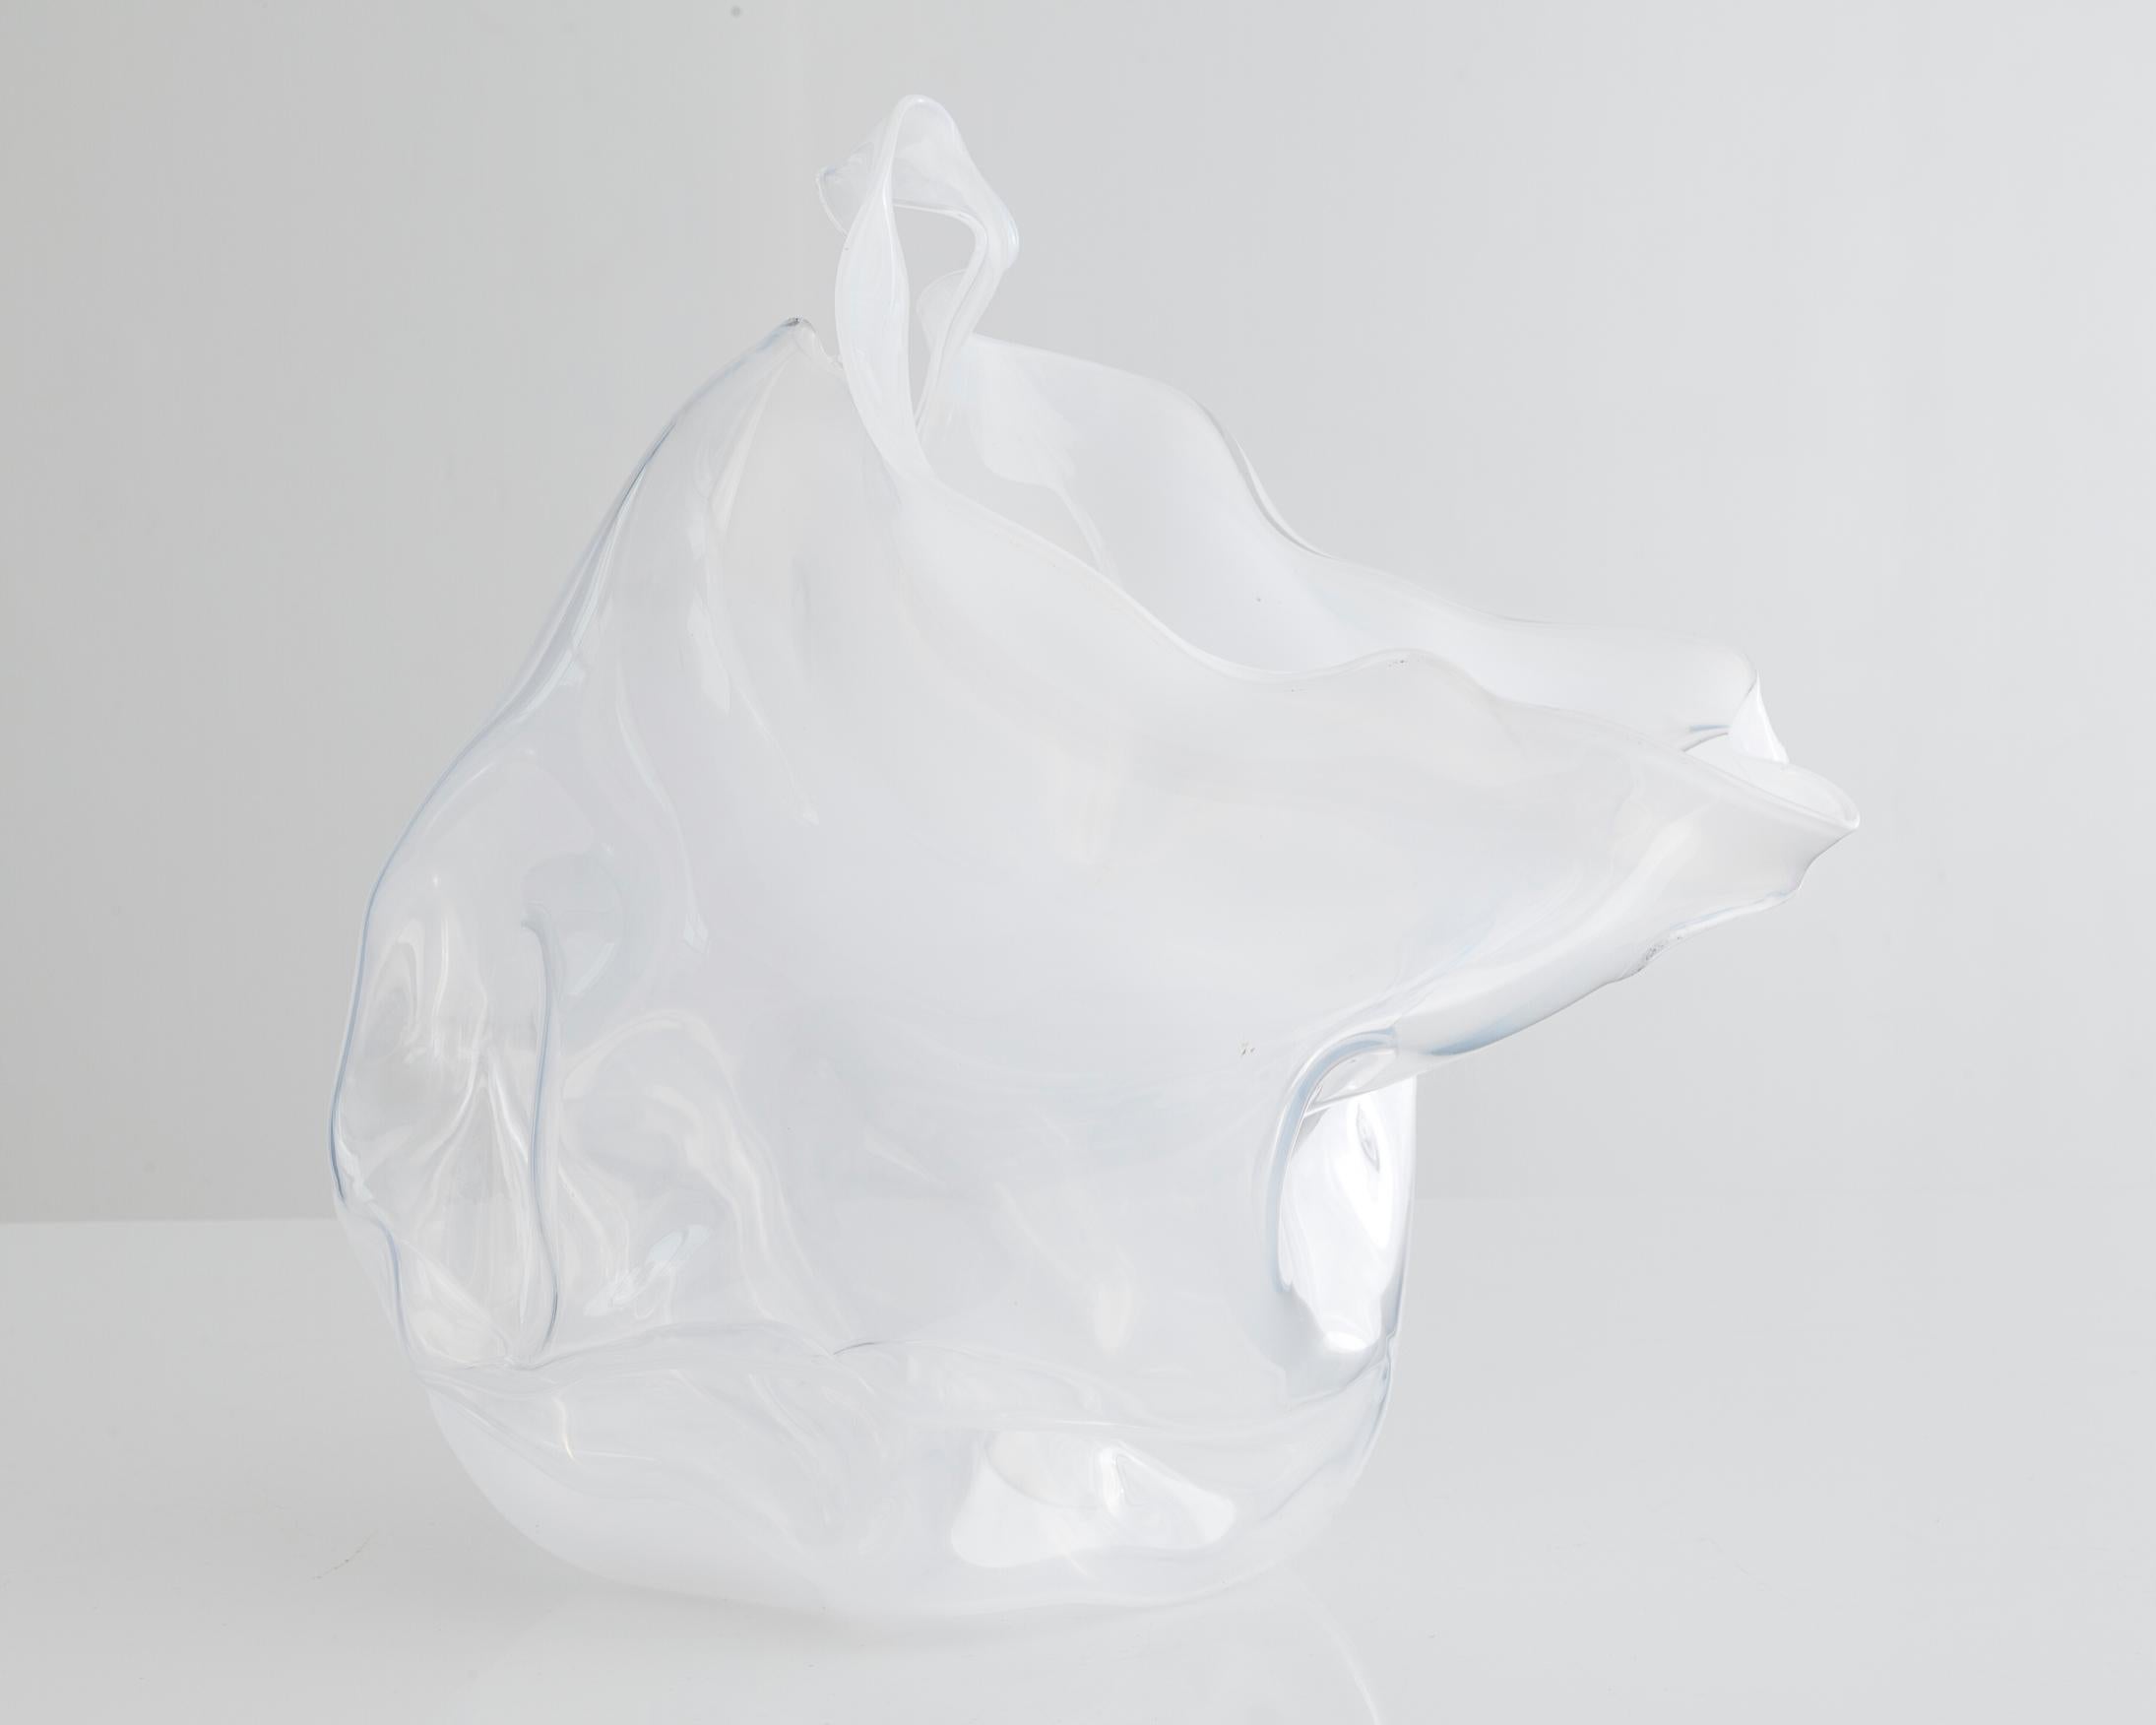 Unique crumpled sculptural vessel in clear hand blown glass. Designed and made by Jeff Zimmerman, USA, 2014.

Limited number available. Please note that each item may differ slightly in color and shape.